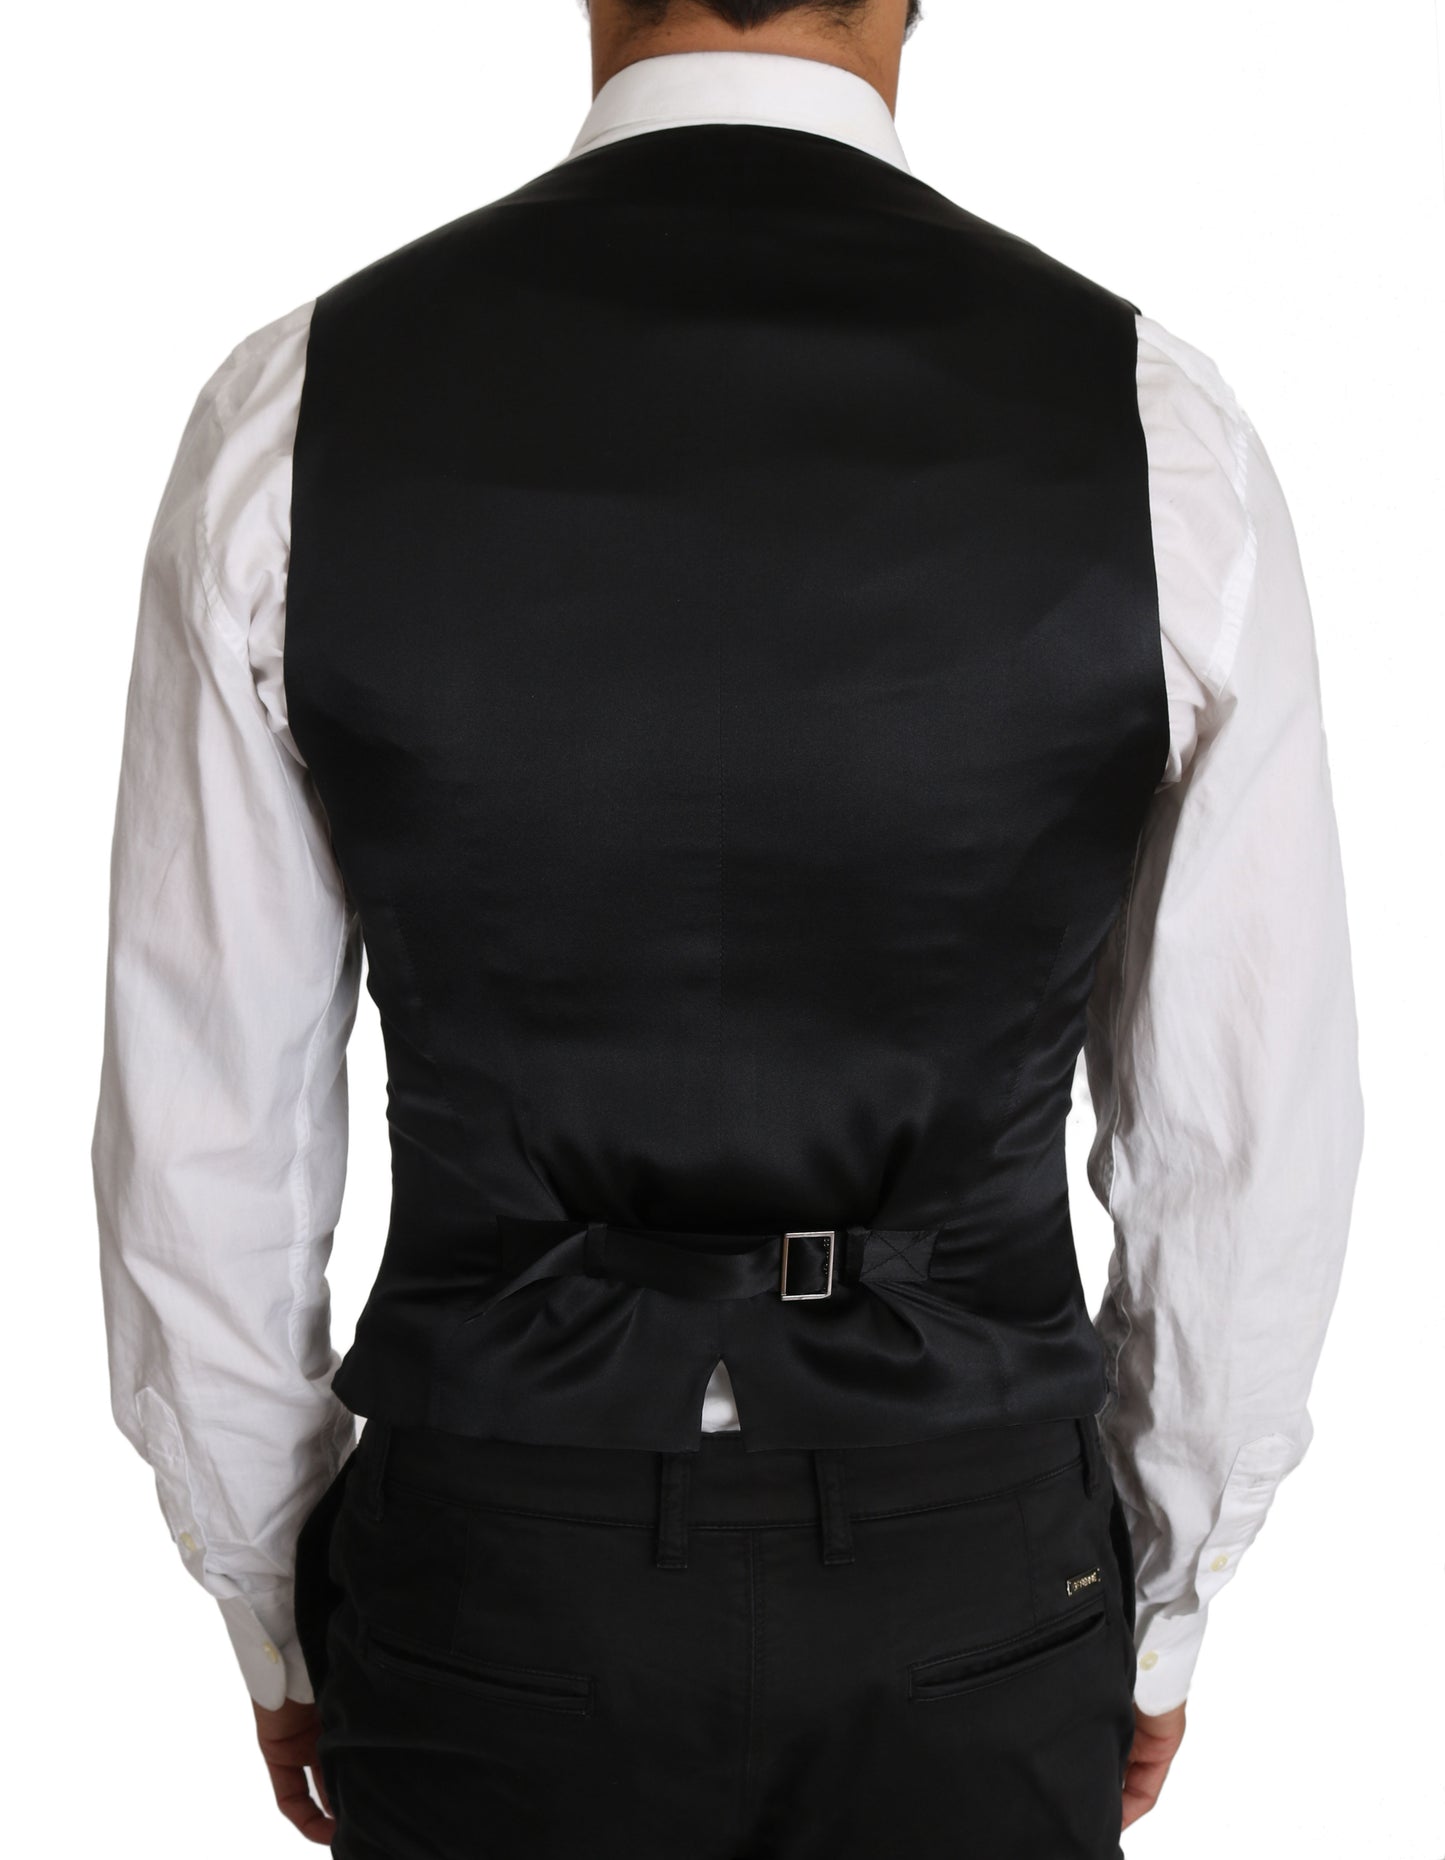 Gray Wool Double Breasted Waistcoat Vest